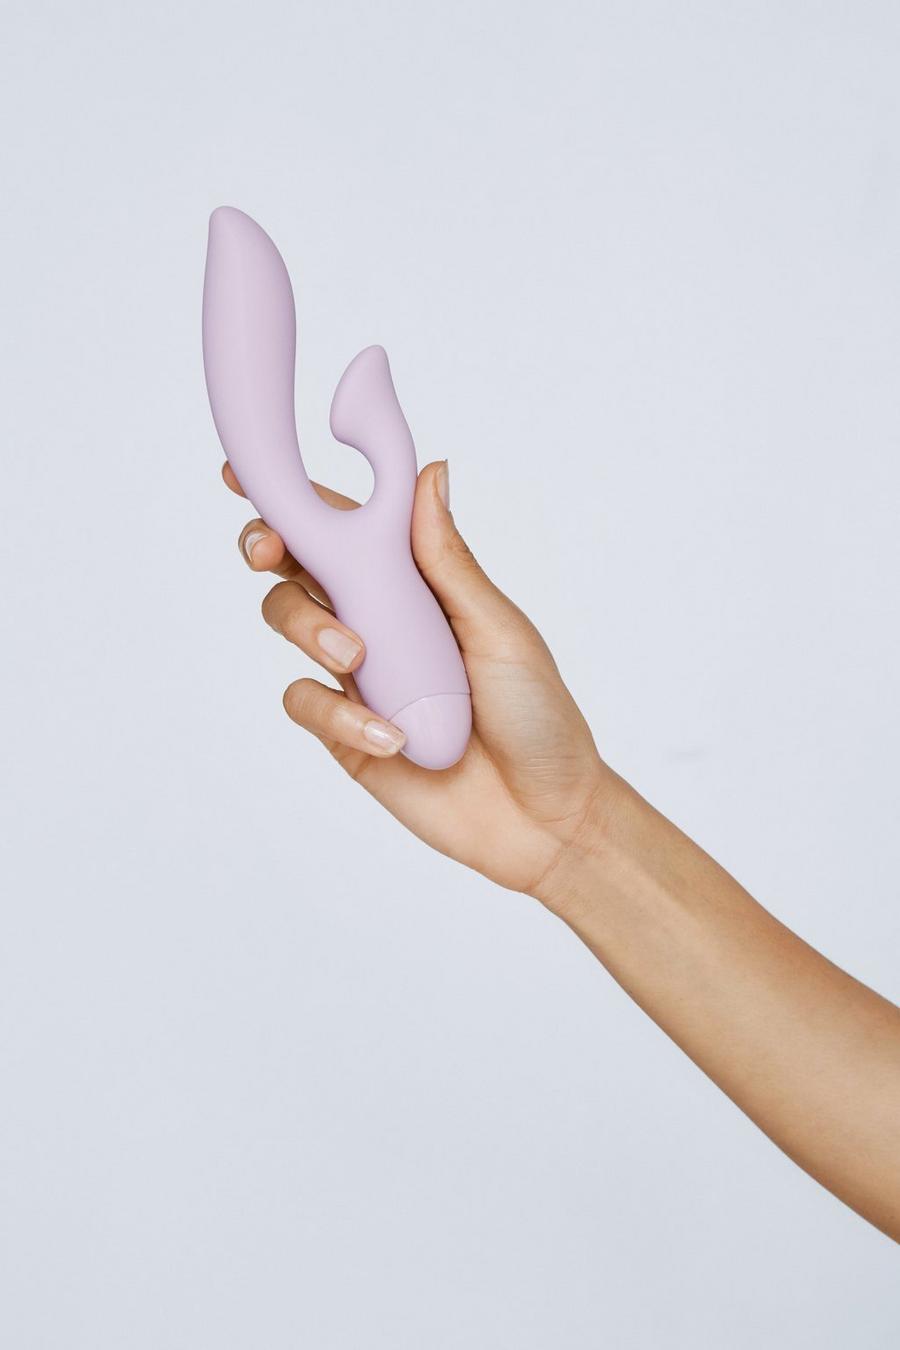 Lilac 10 Function Dual Motor Rechargeable Rabbit Vibrator Sex Toy